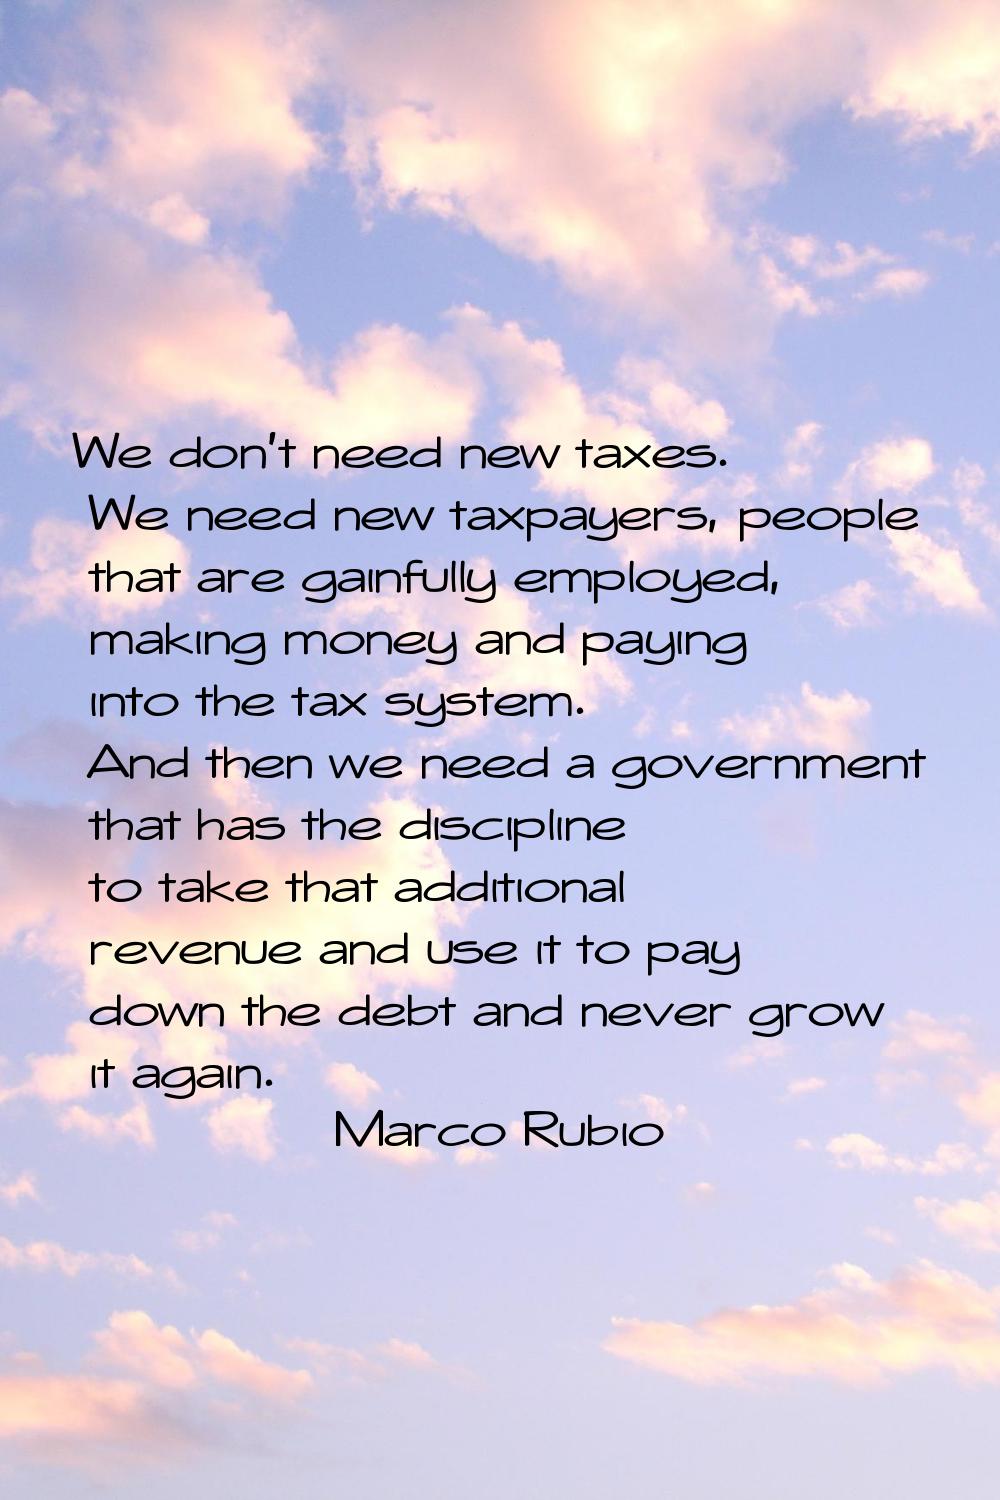 We don't need new taxes. We need new taxpayers, people that are gainfully employed, making money an